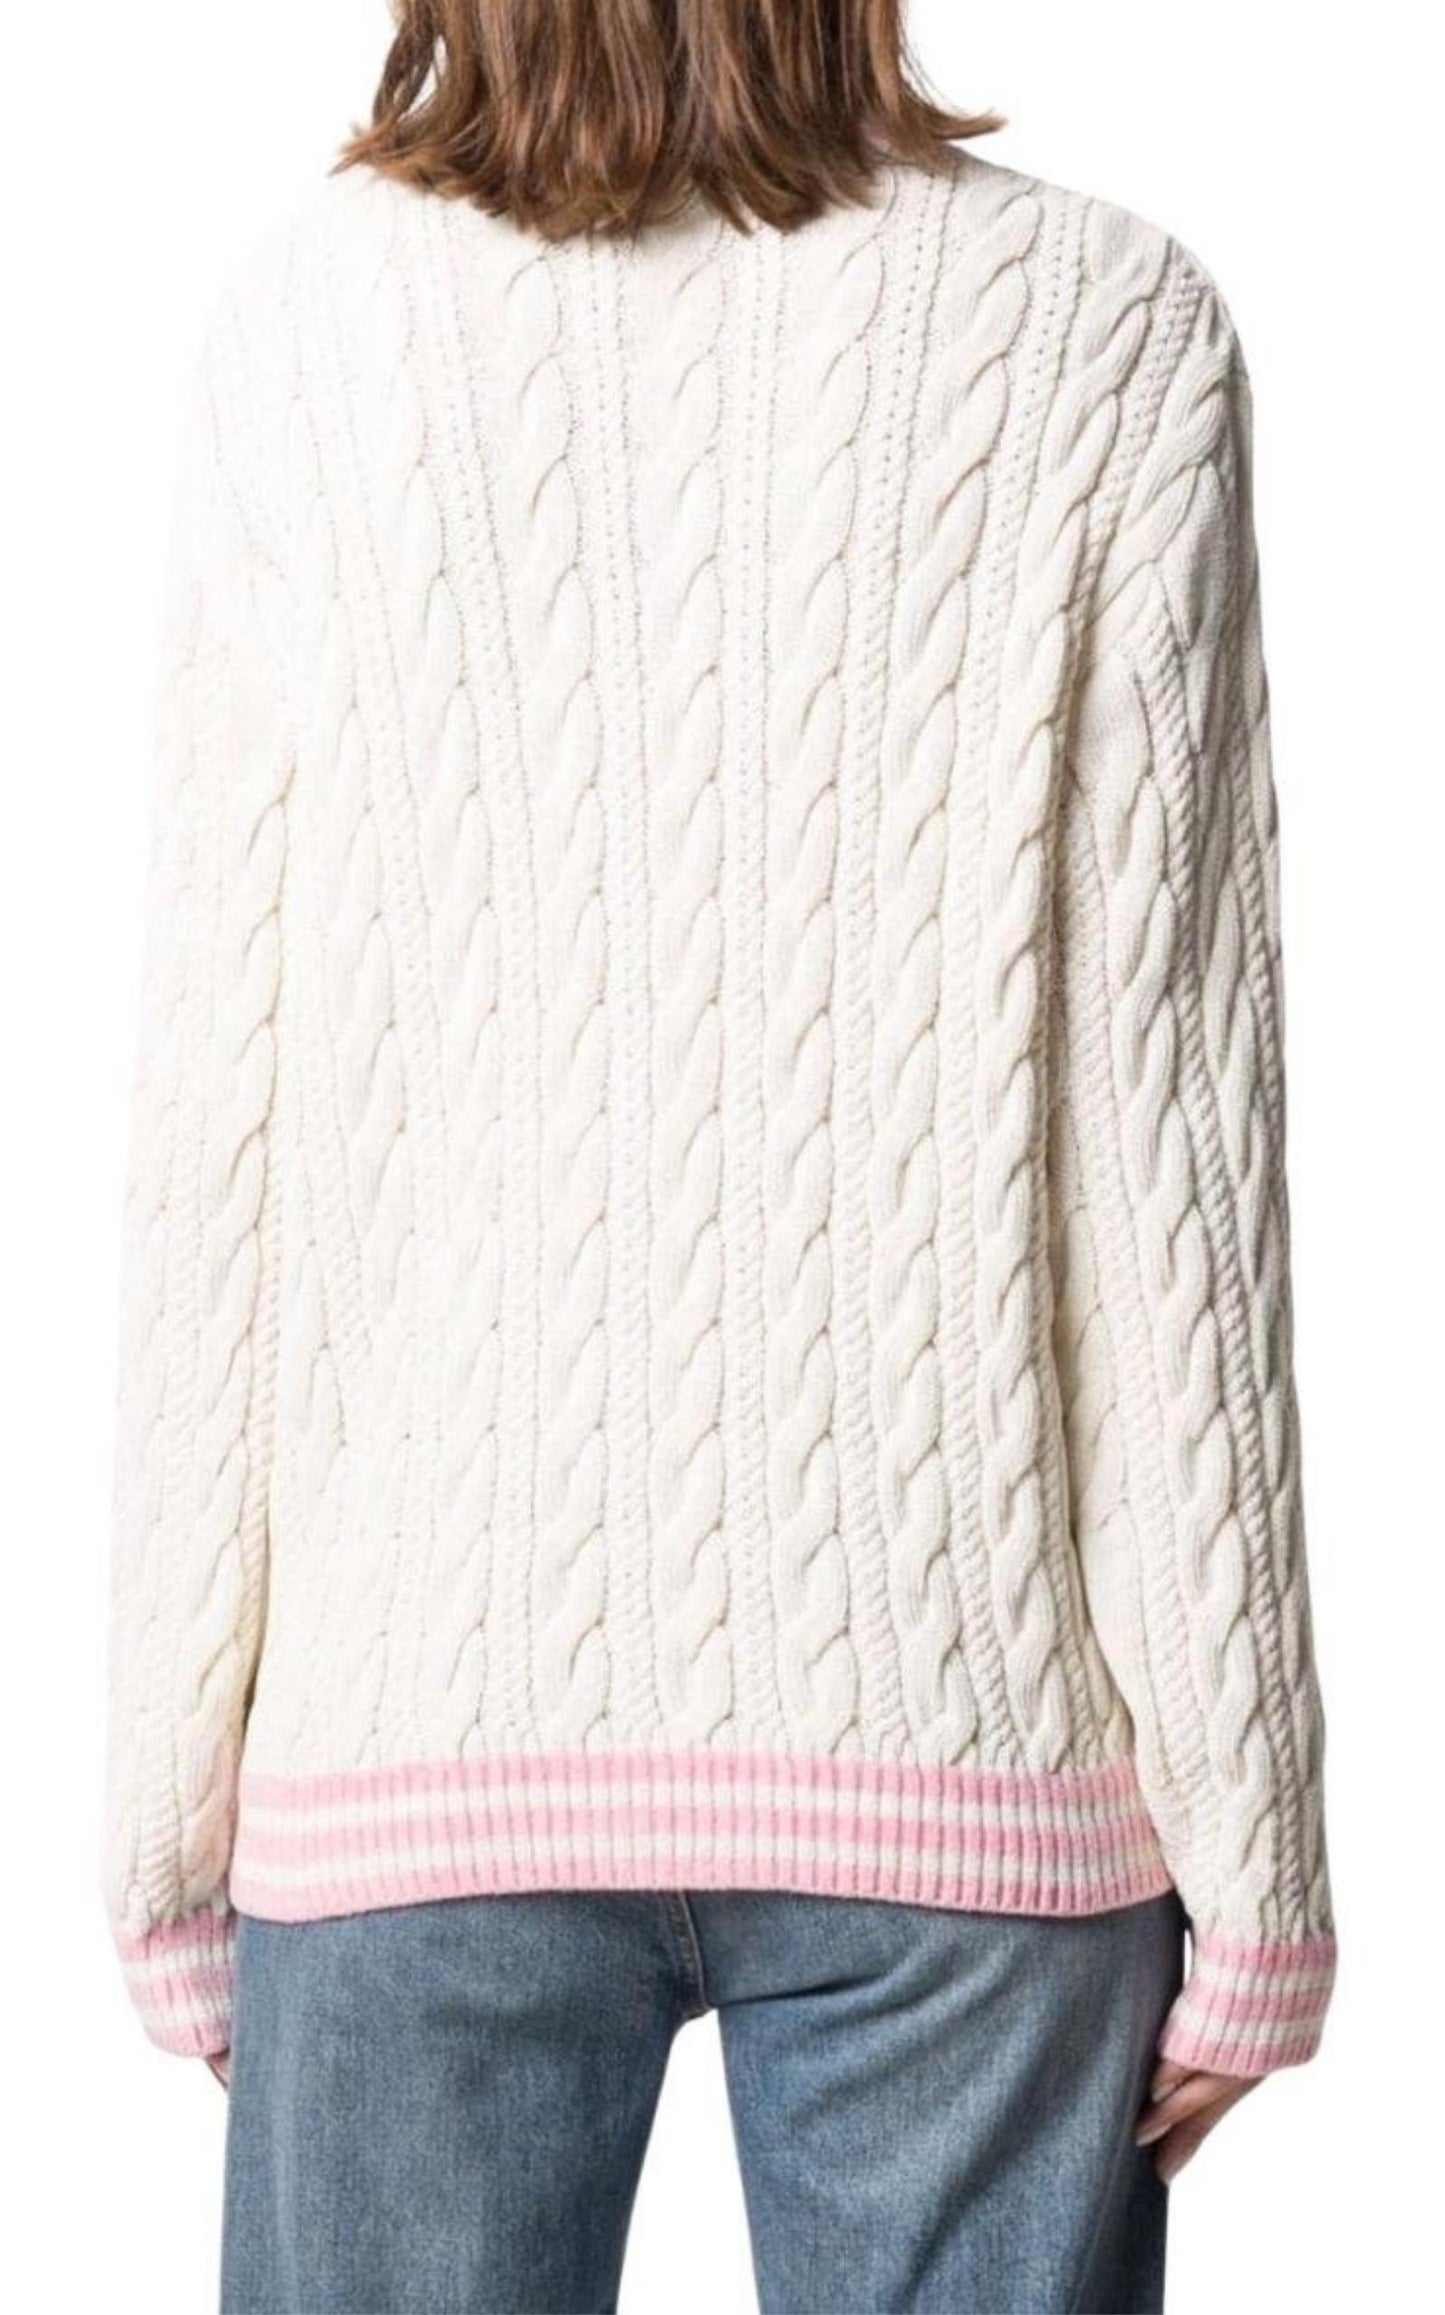  BalmainWool-Blend Cable Knit Sweater With Patch - Runway Catalog